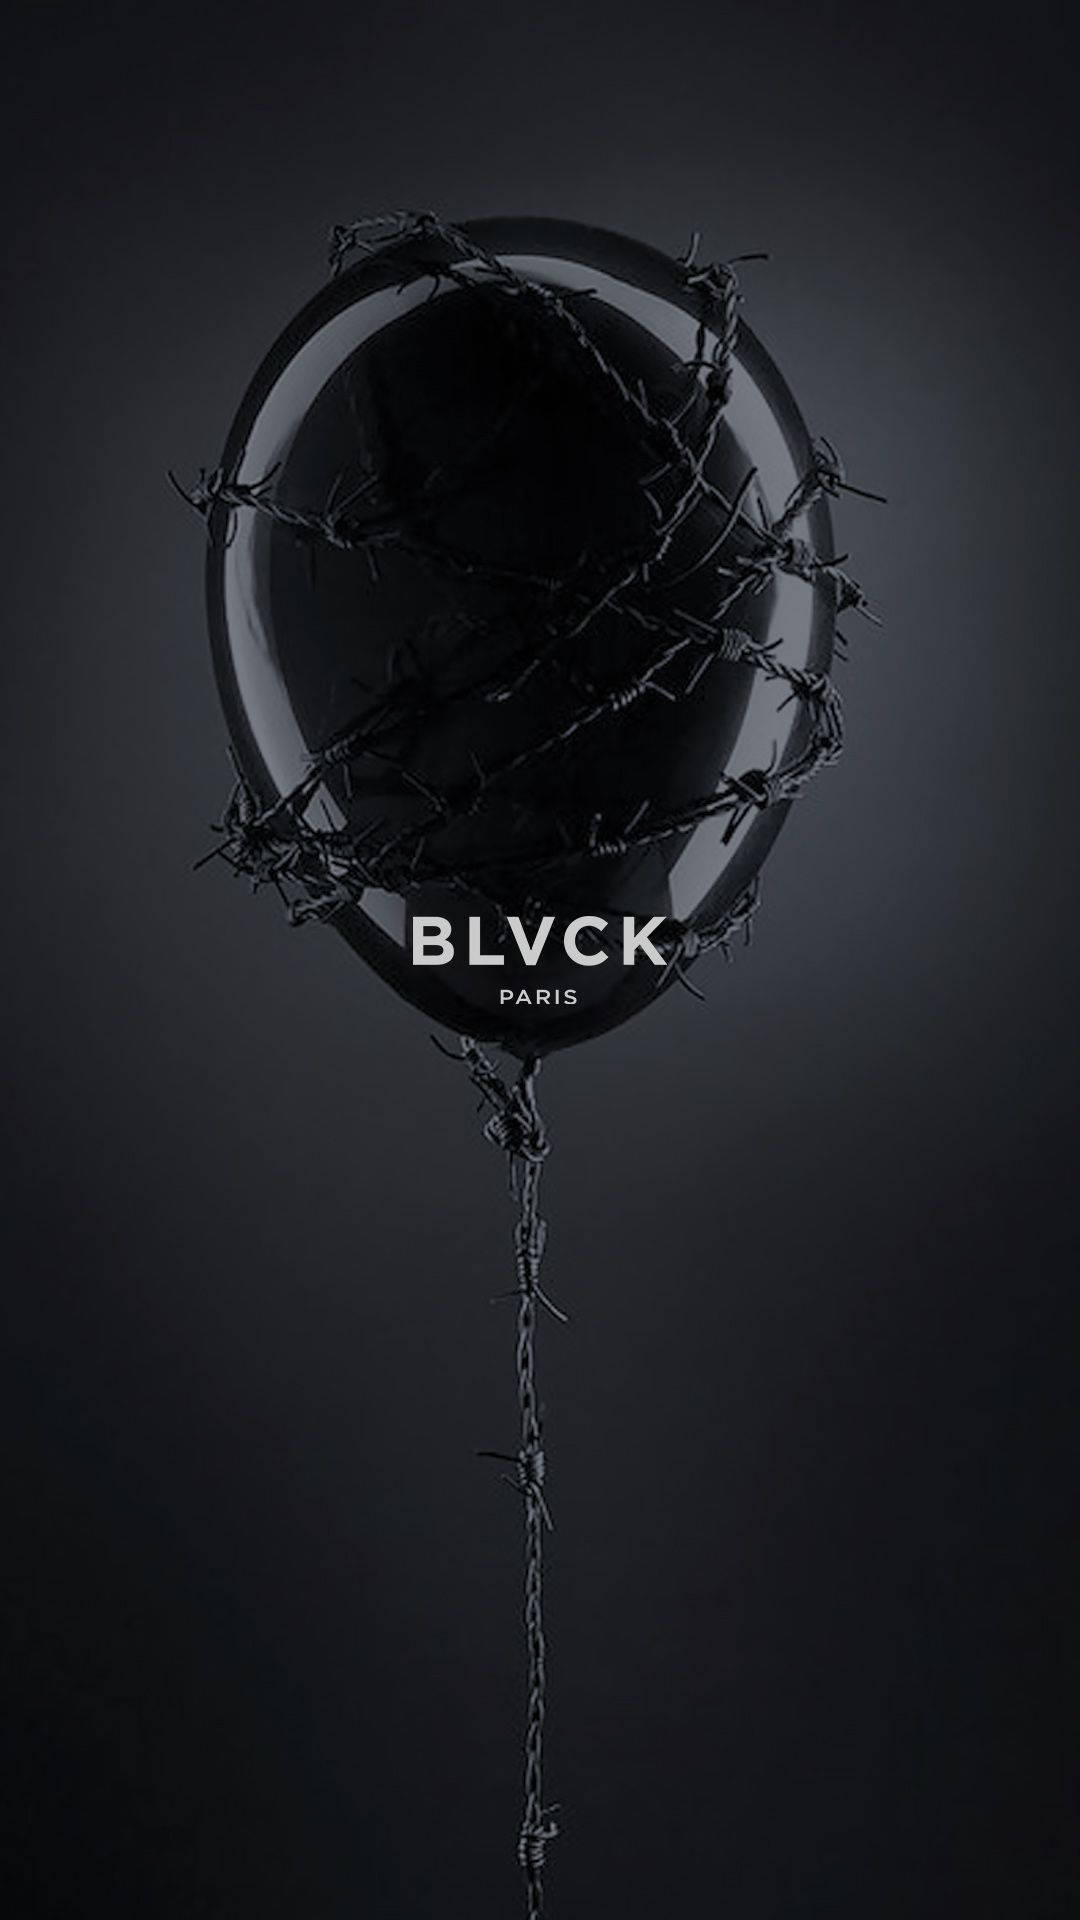 Blvck Paris Barbed Wire Balloon Wallpaper